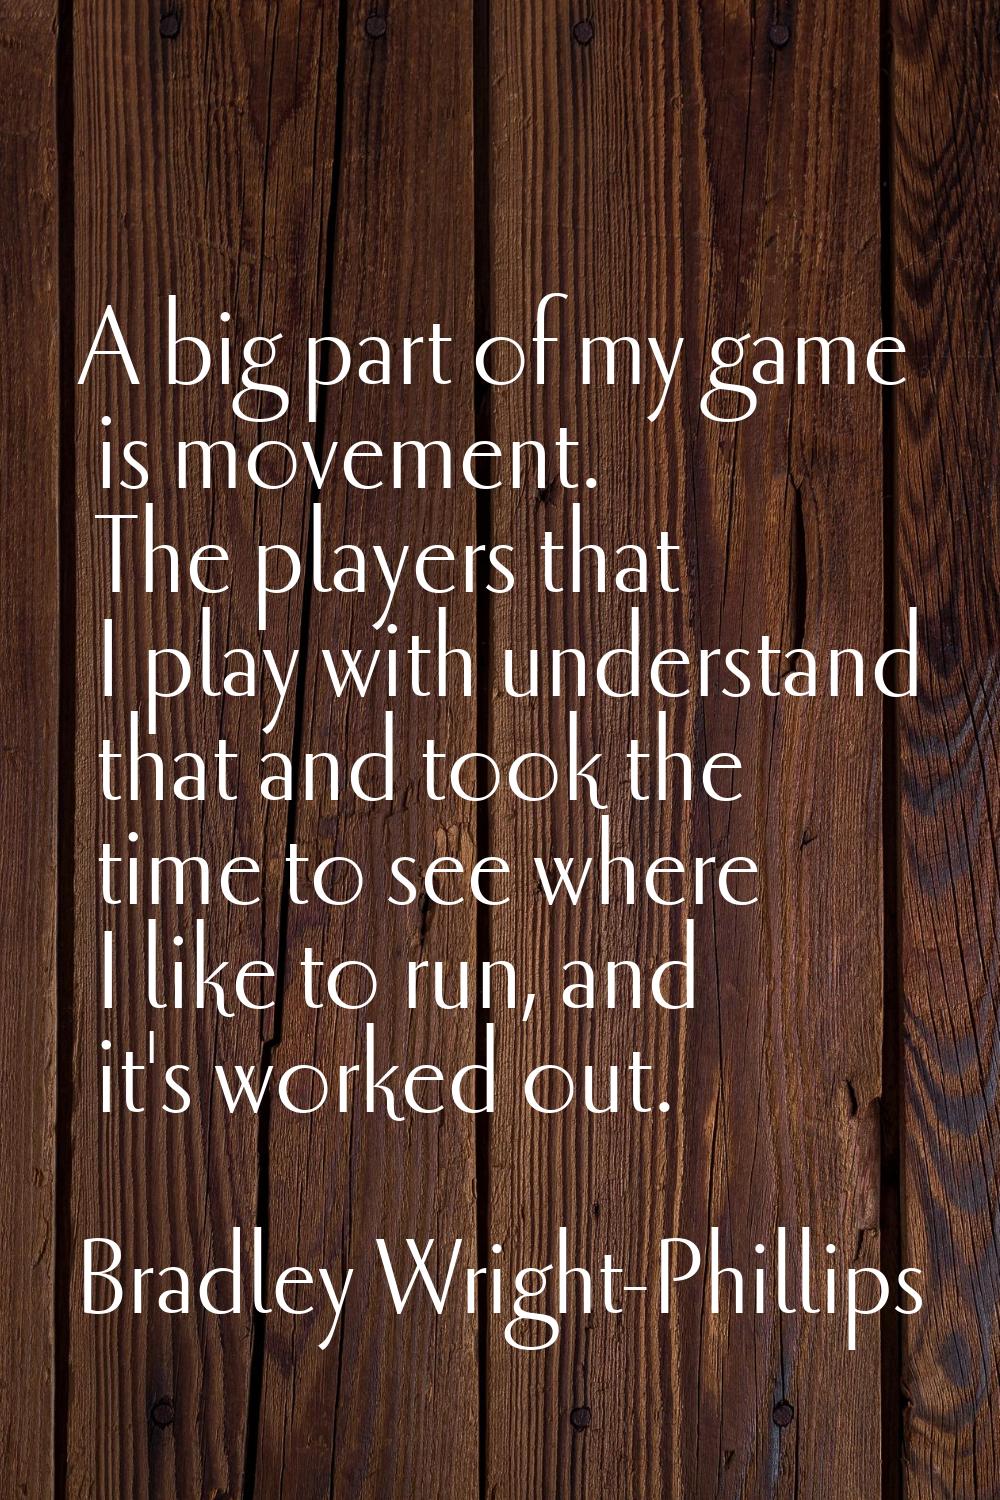 A big part of my game is movement. The players that I play with understand that and took the time t